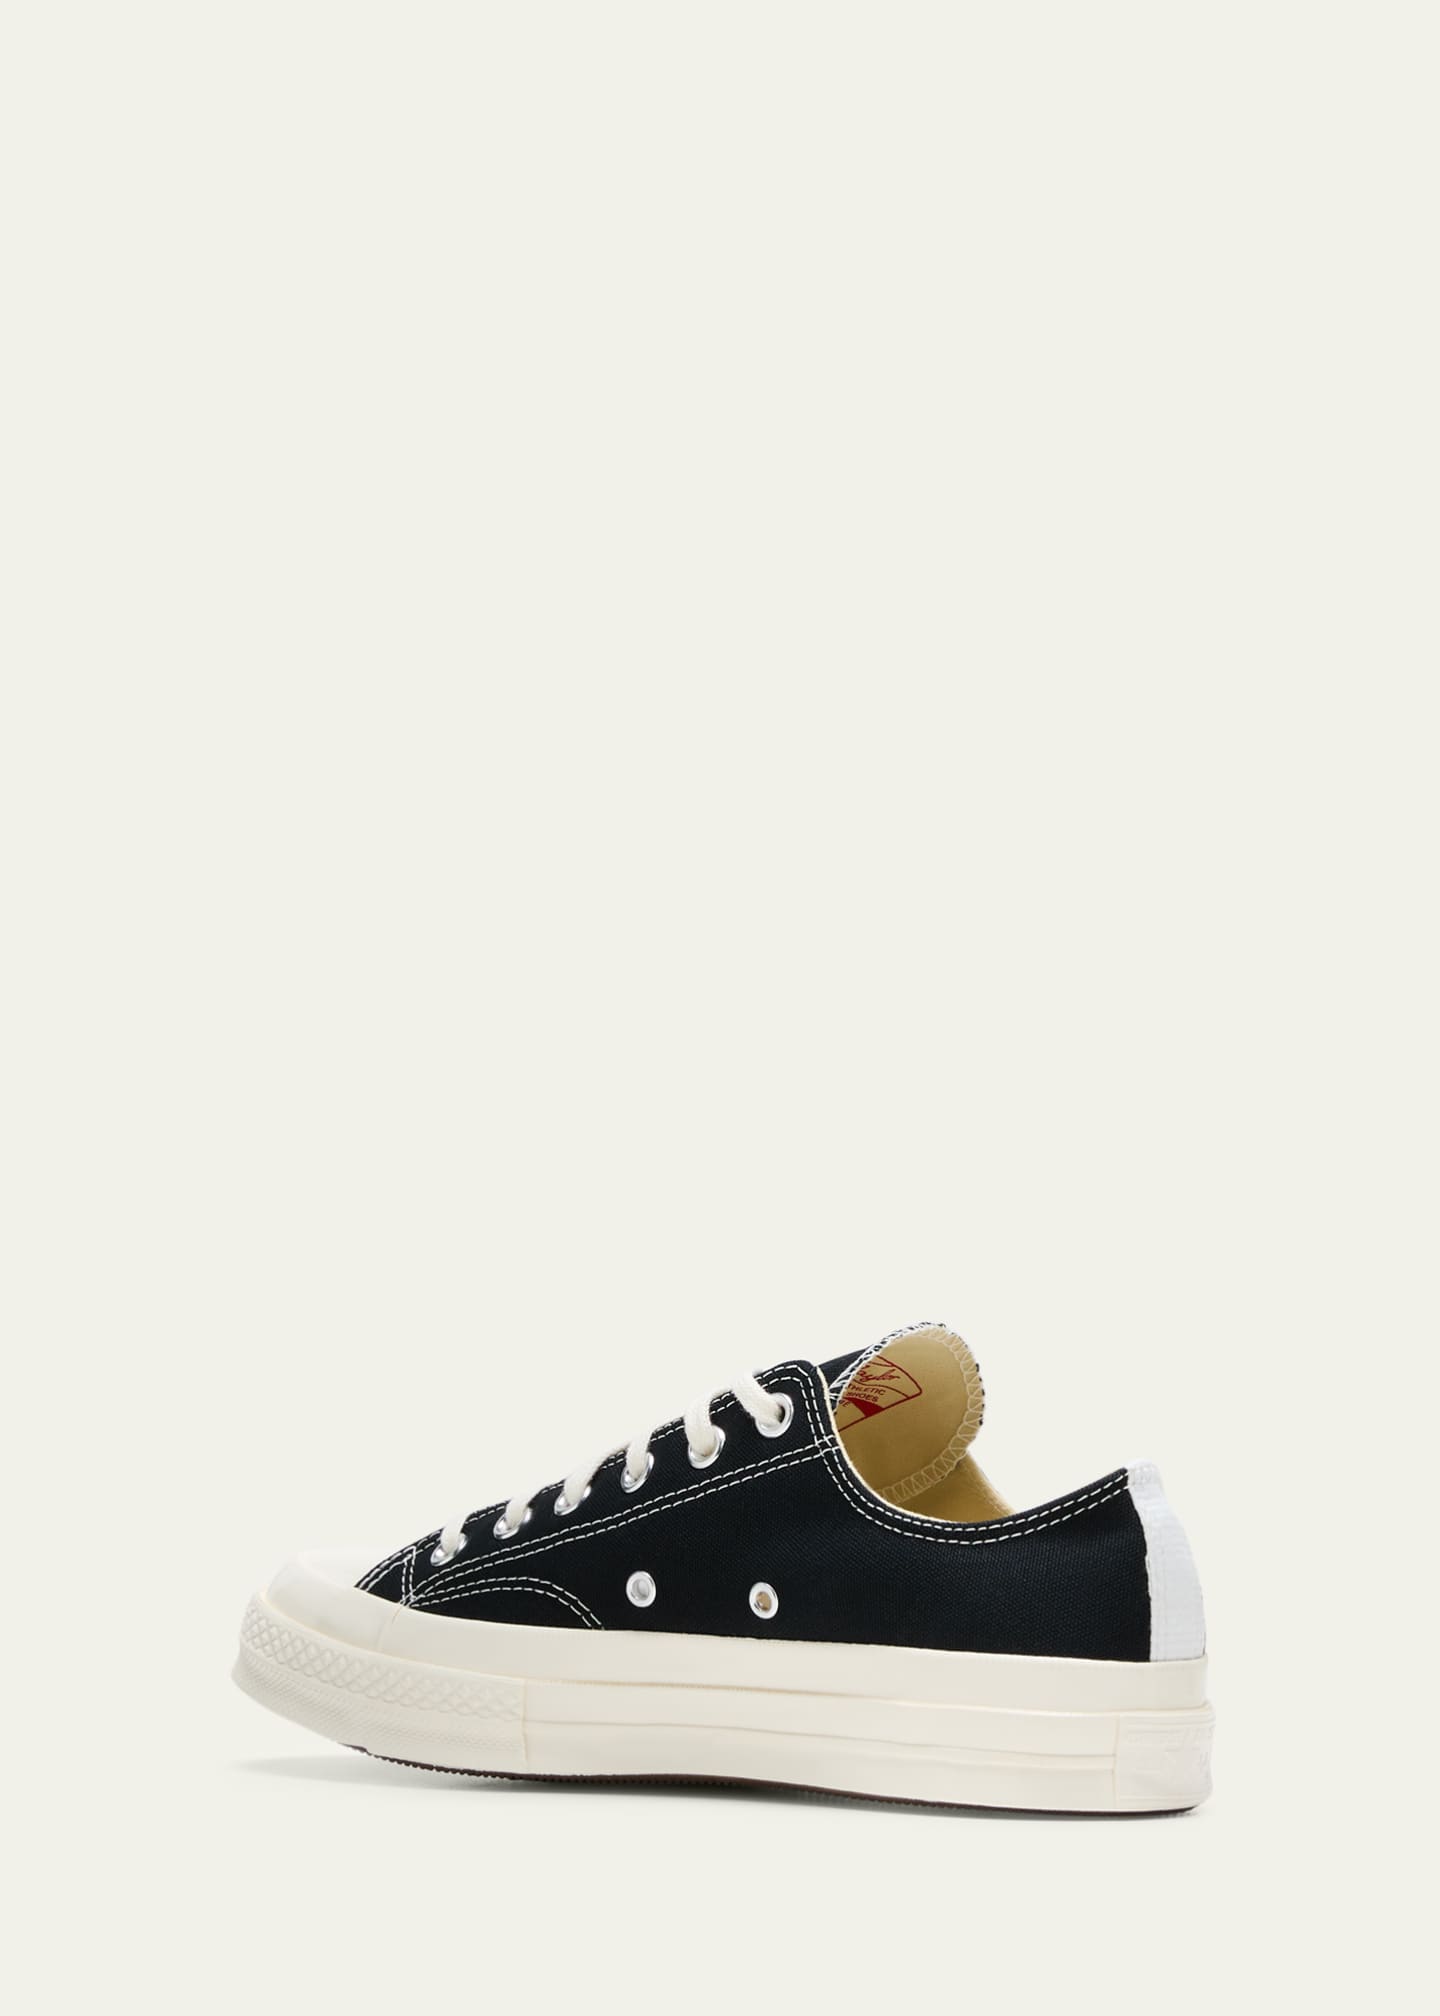 CDG Play x Converse Chuck Taylor Canvas Low-Top Sneakers - Bergdorf Goodman